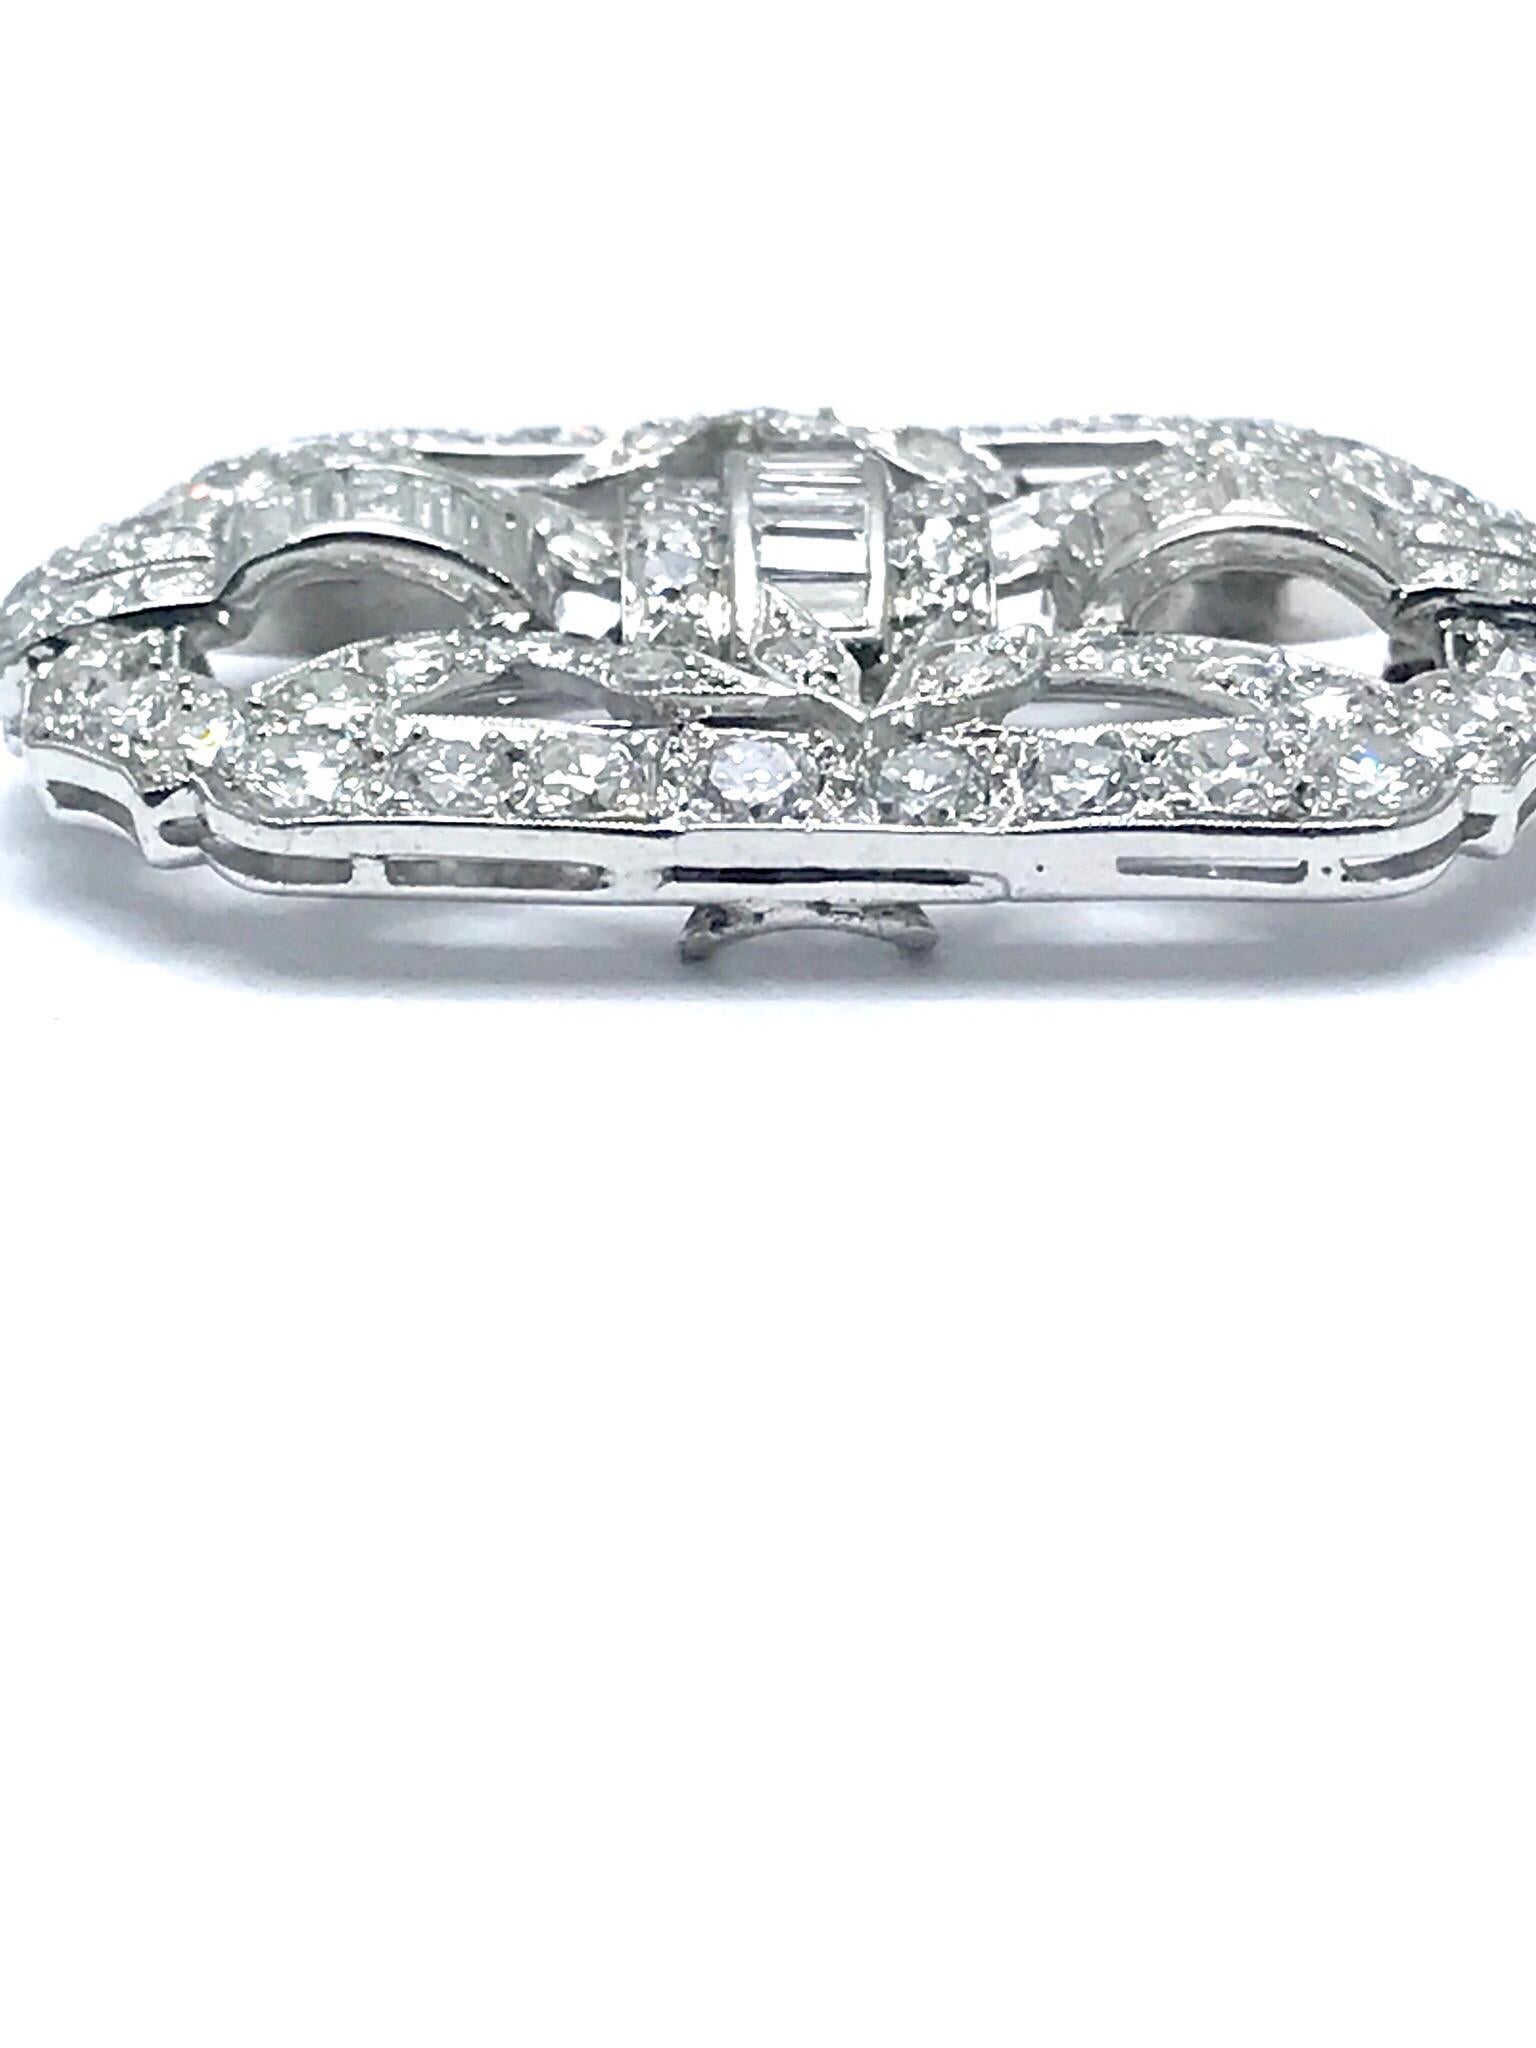 A beautiful Art Deco style Diamond platinum brooch and pendant.  The brooch is made up of round brilliant, single cut and baguette Diamonds.  There are 58 round Diamonds with a total weight of 3.14 carats, and 16 baguette Diamonds with a total